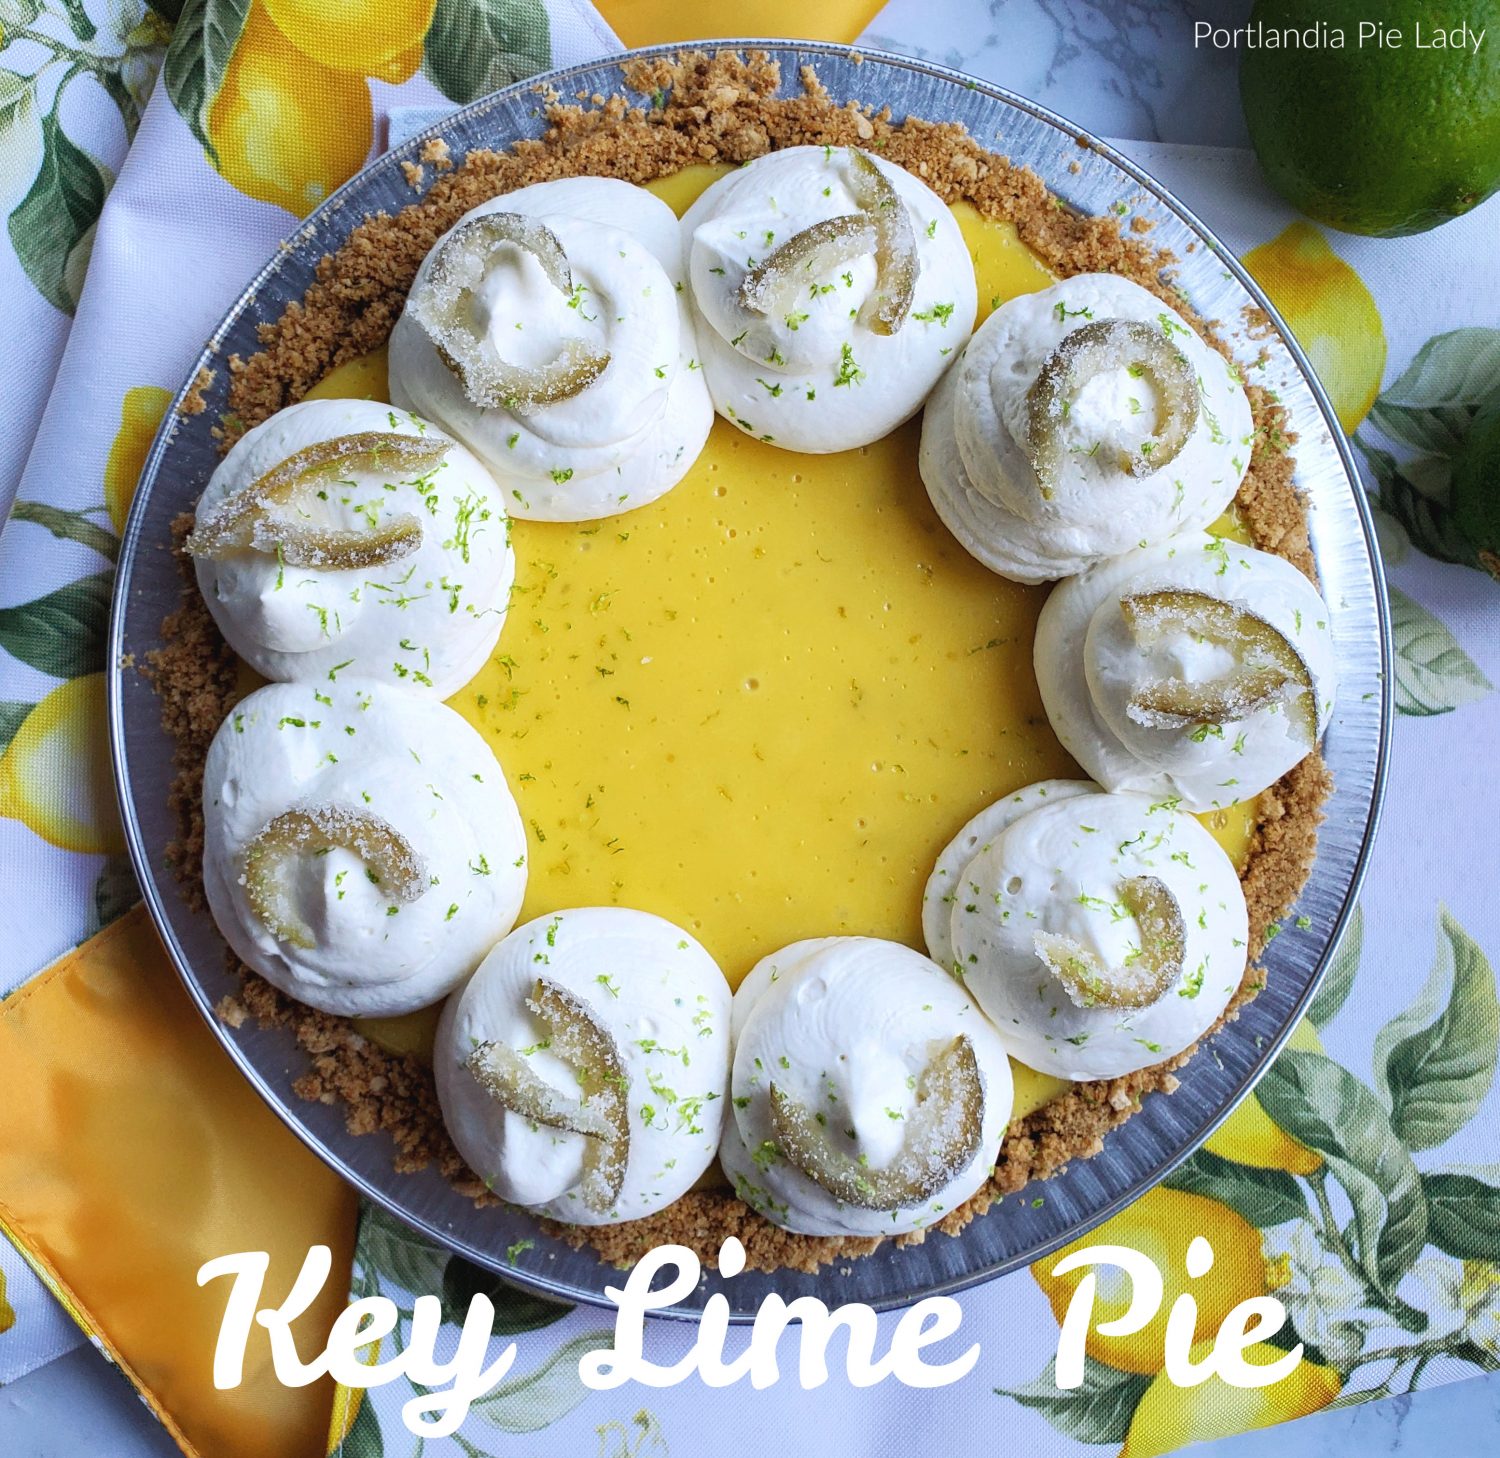 Key Lime Pie, a creamy burst of lime welcoming some warm summer nights with a cool tropical burst of key lime pie with key-lime infused whipped cream.